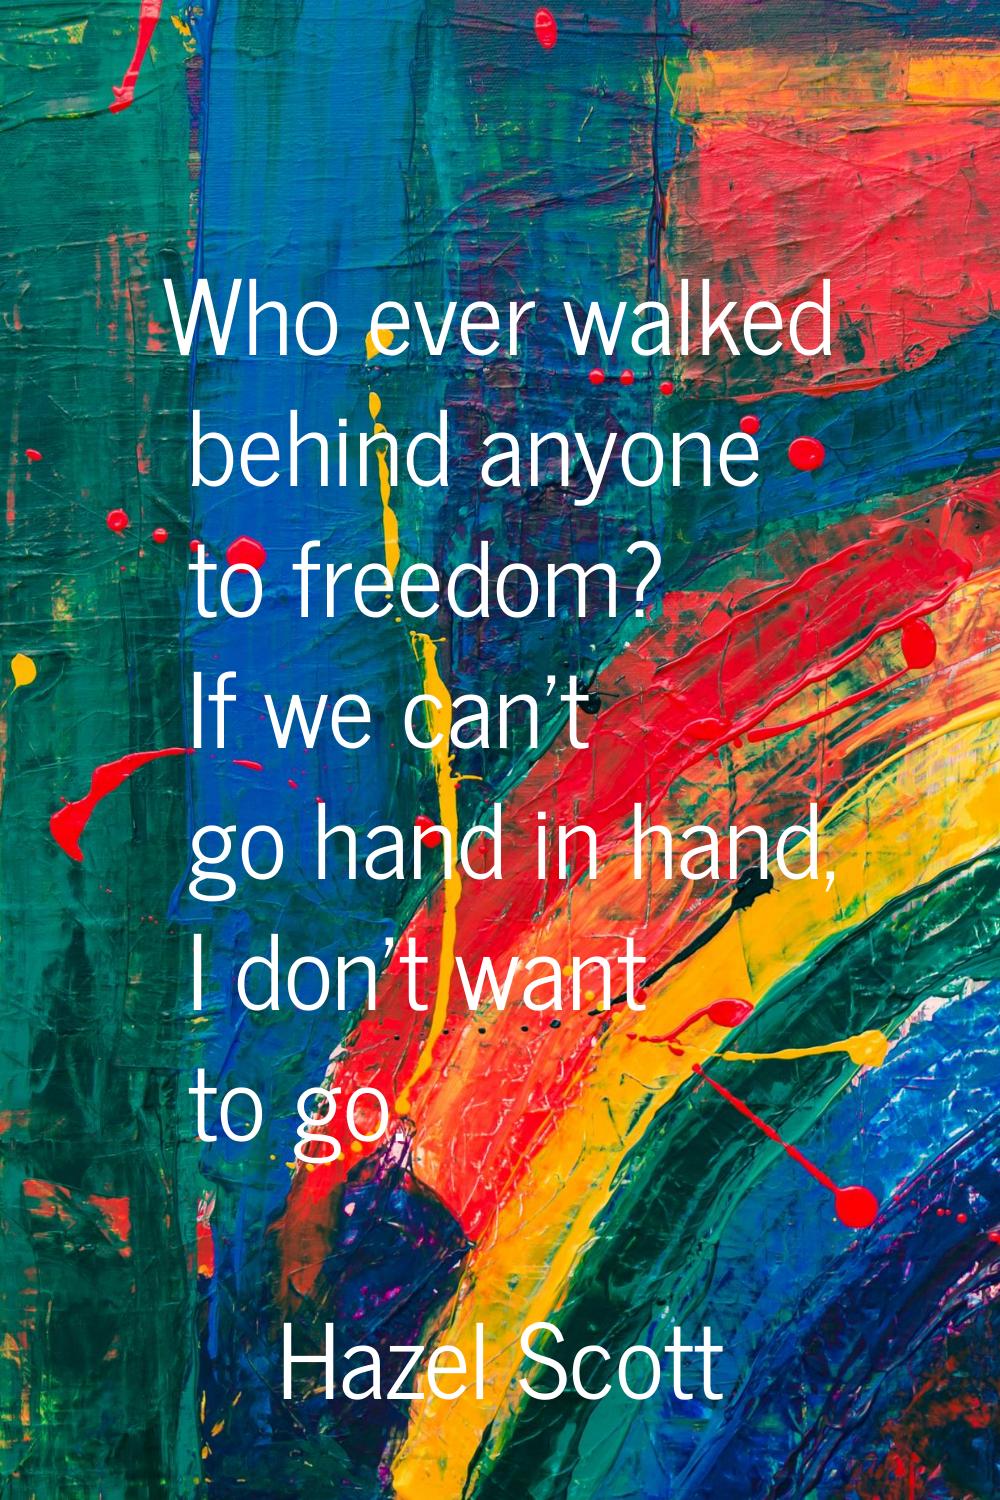 Who ever walked behind anyone to freedom? If we can't go hand in hand, I don't want to go.